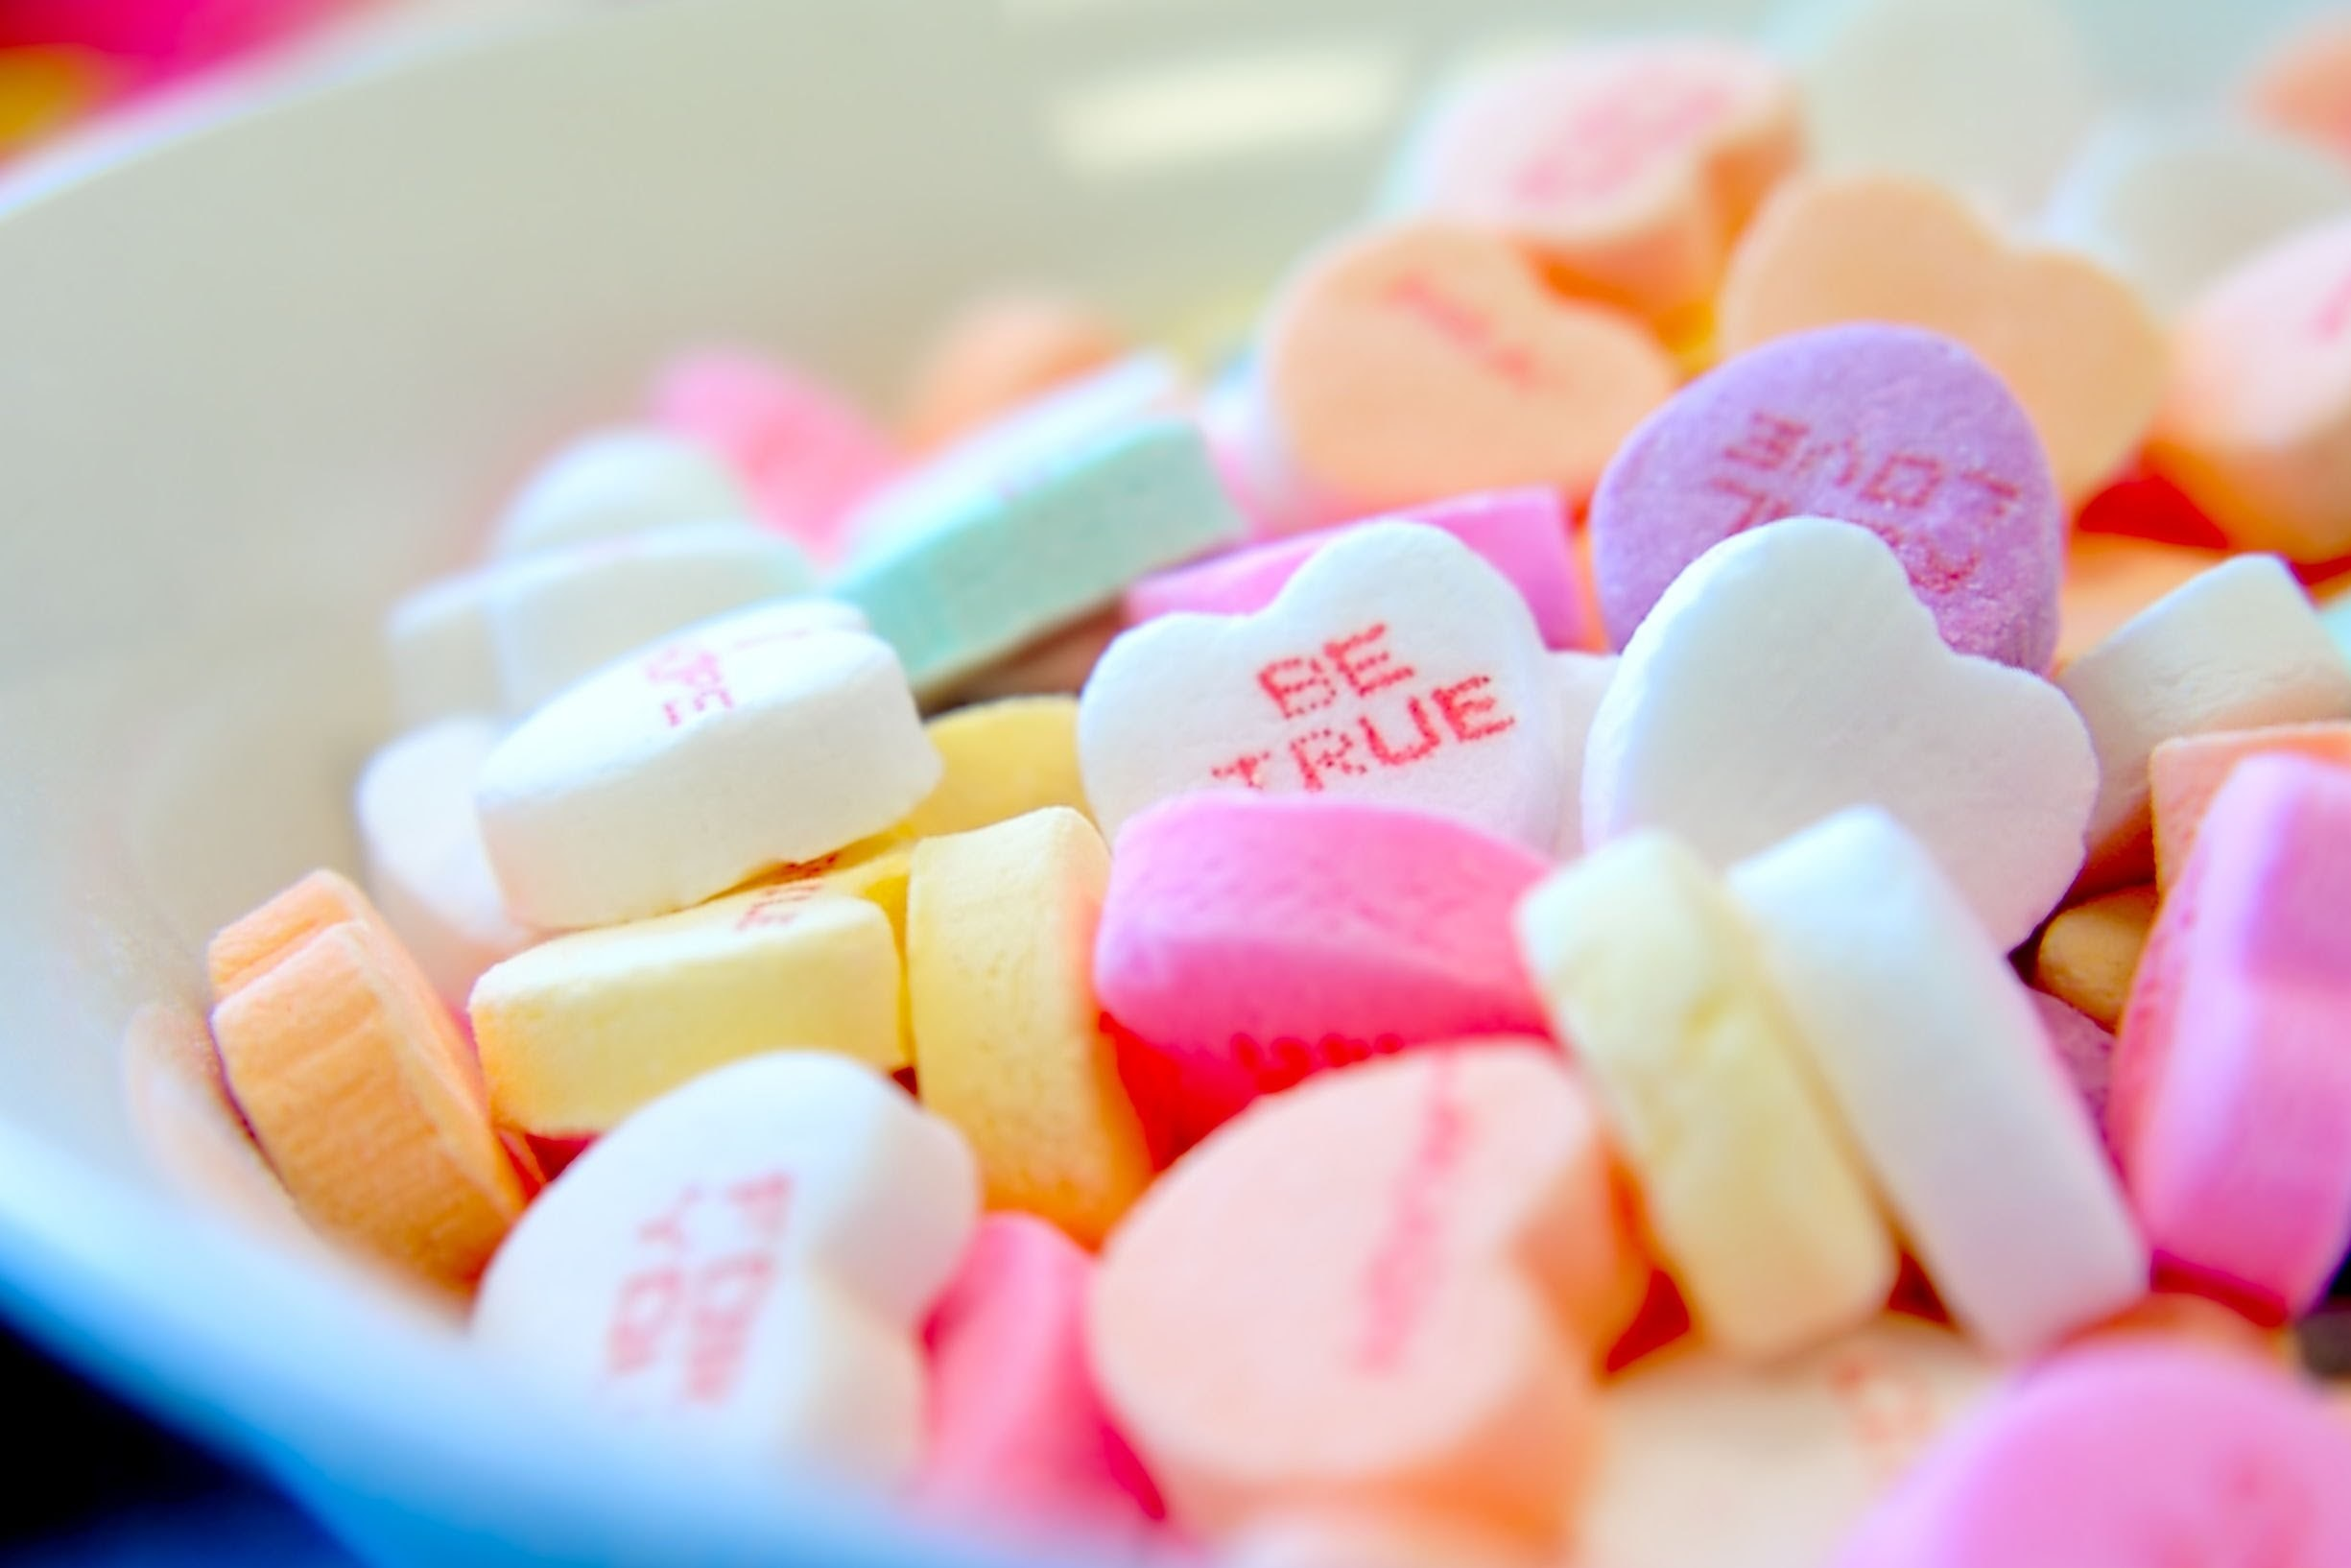 A bowl of heart candies.